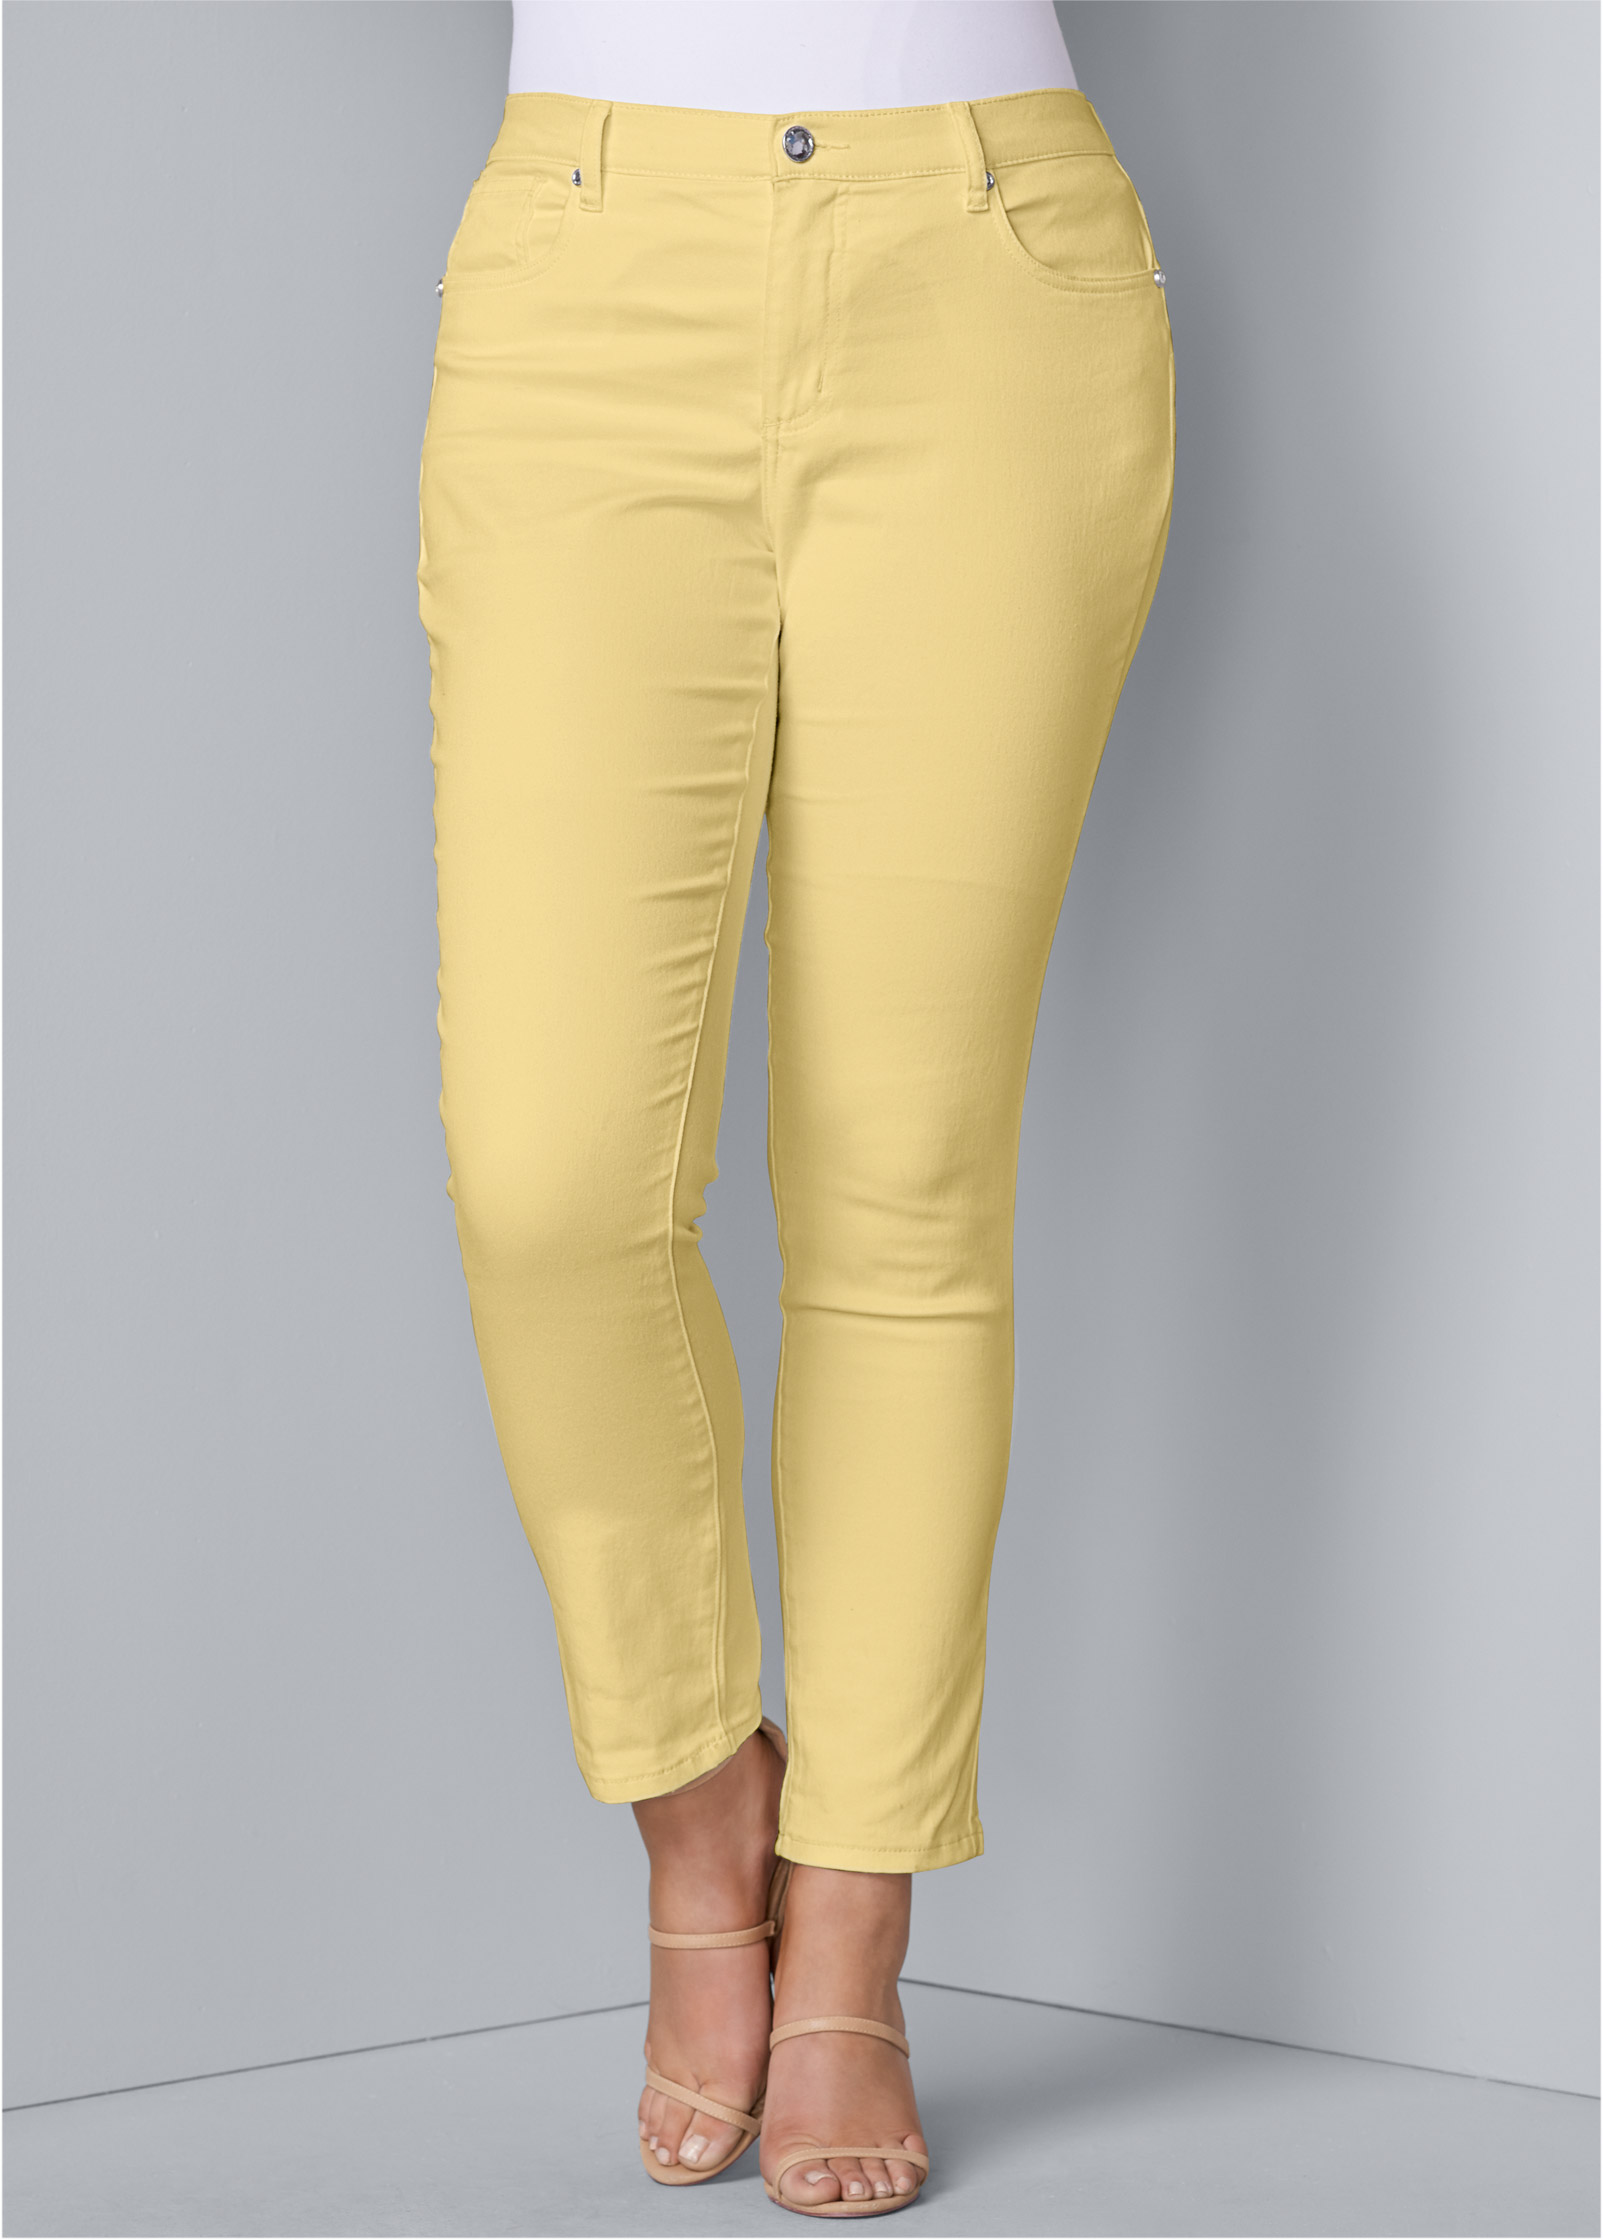 mustard colored plus size jeans